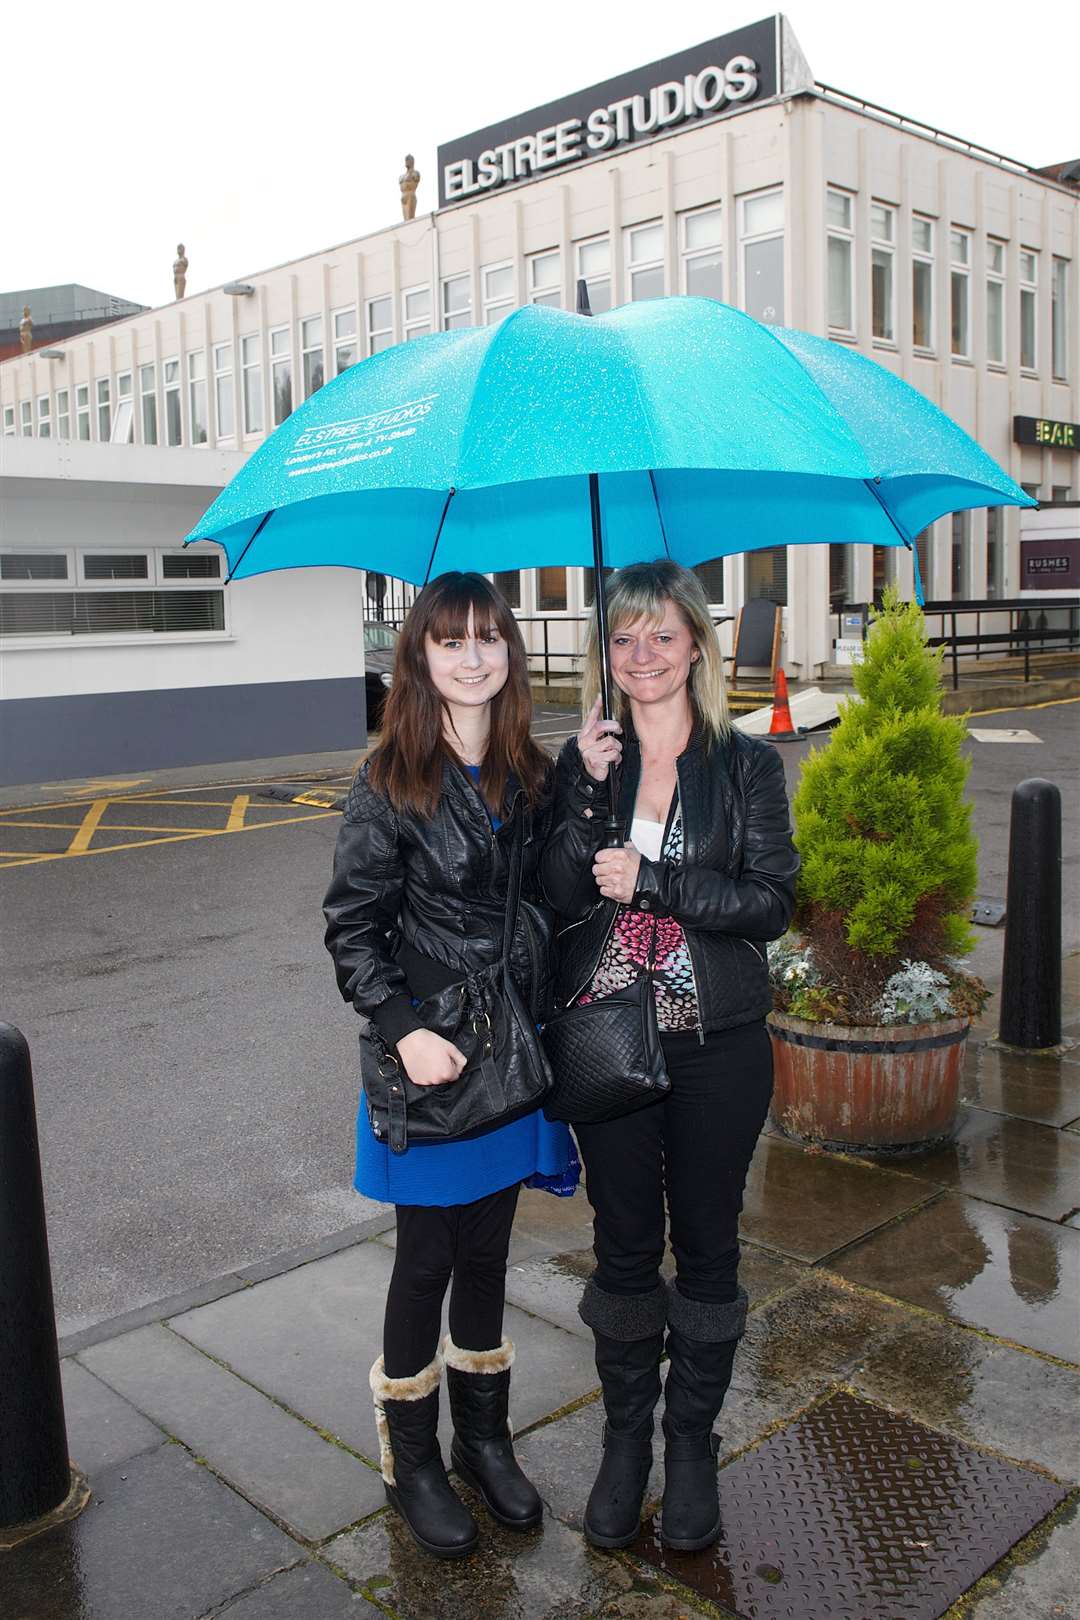 Katie Tancred, 18 and her mum Tina got to tour the Big Brother house at Elstree Studios in Borehamwood.